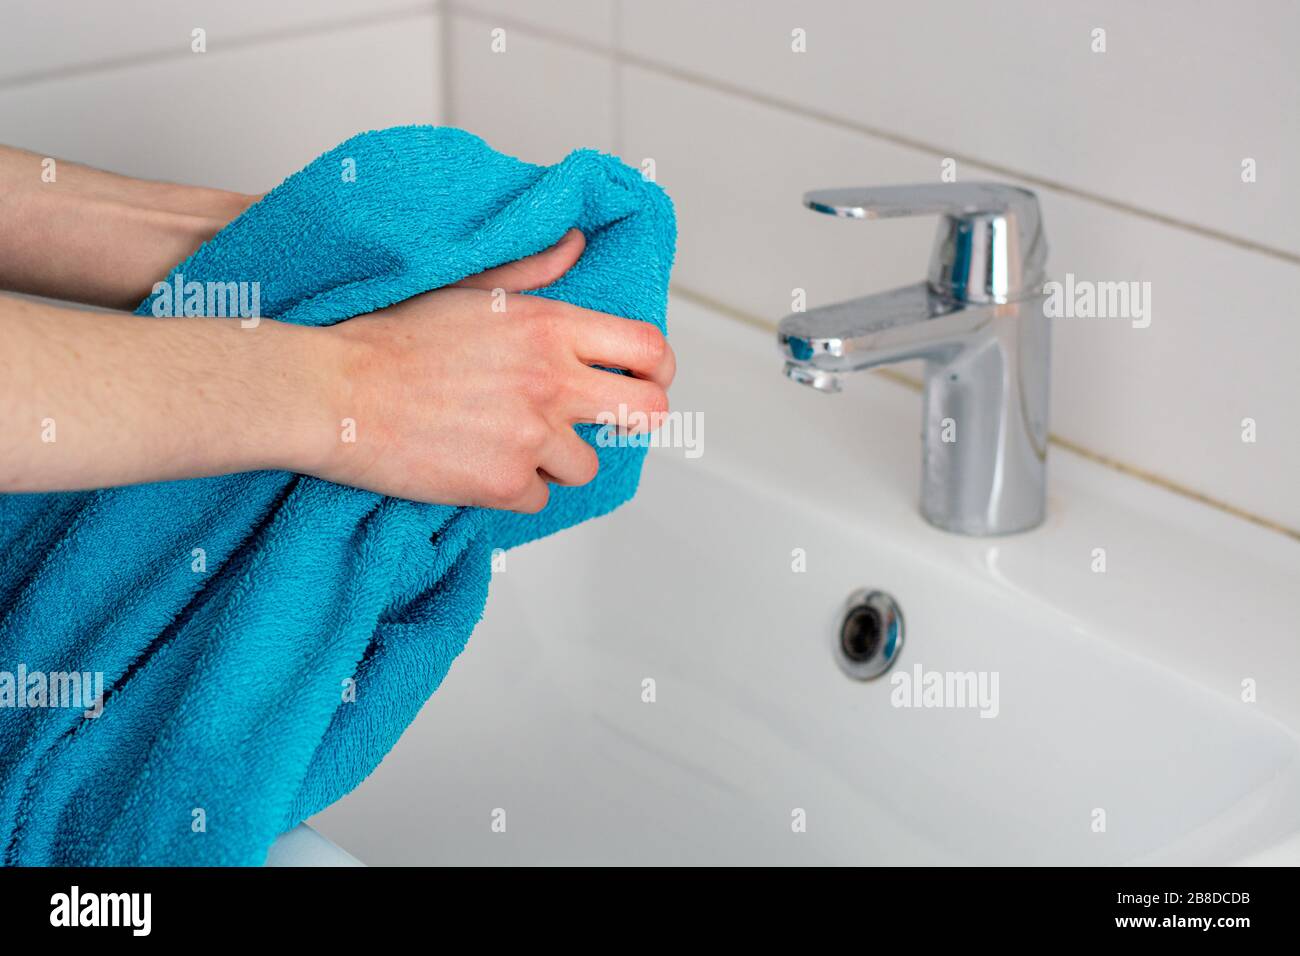 Woman Wipe Hands Dry Towel Washing Bathroom Home Hygiene Hand Stock Photo  by ©goffkein 330686672